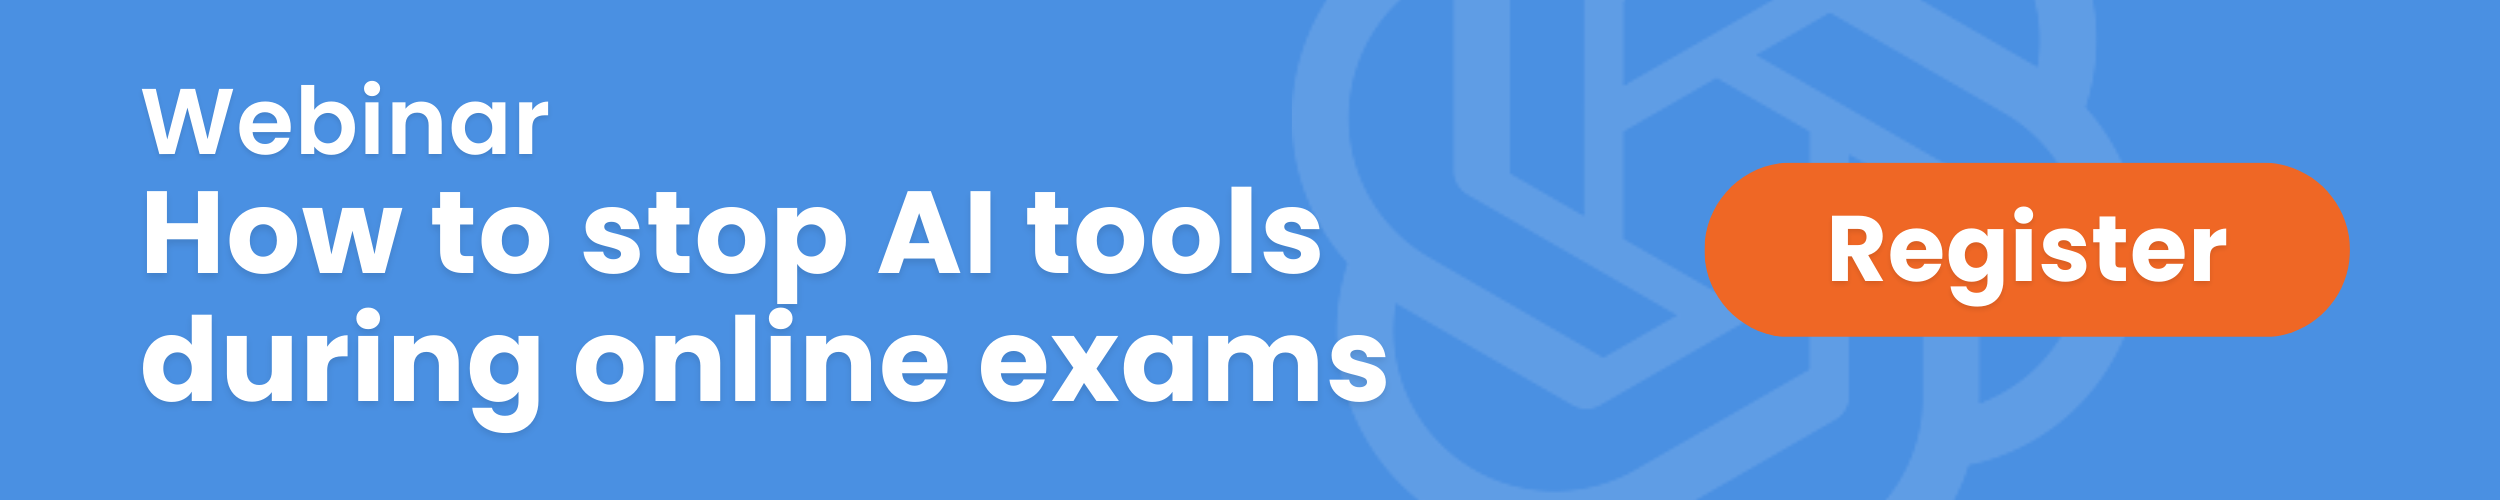 Registration banner for a webinar about how to stop AI tools like ChatGPT during online exams